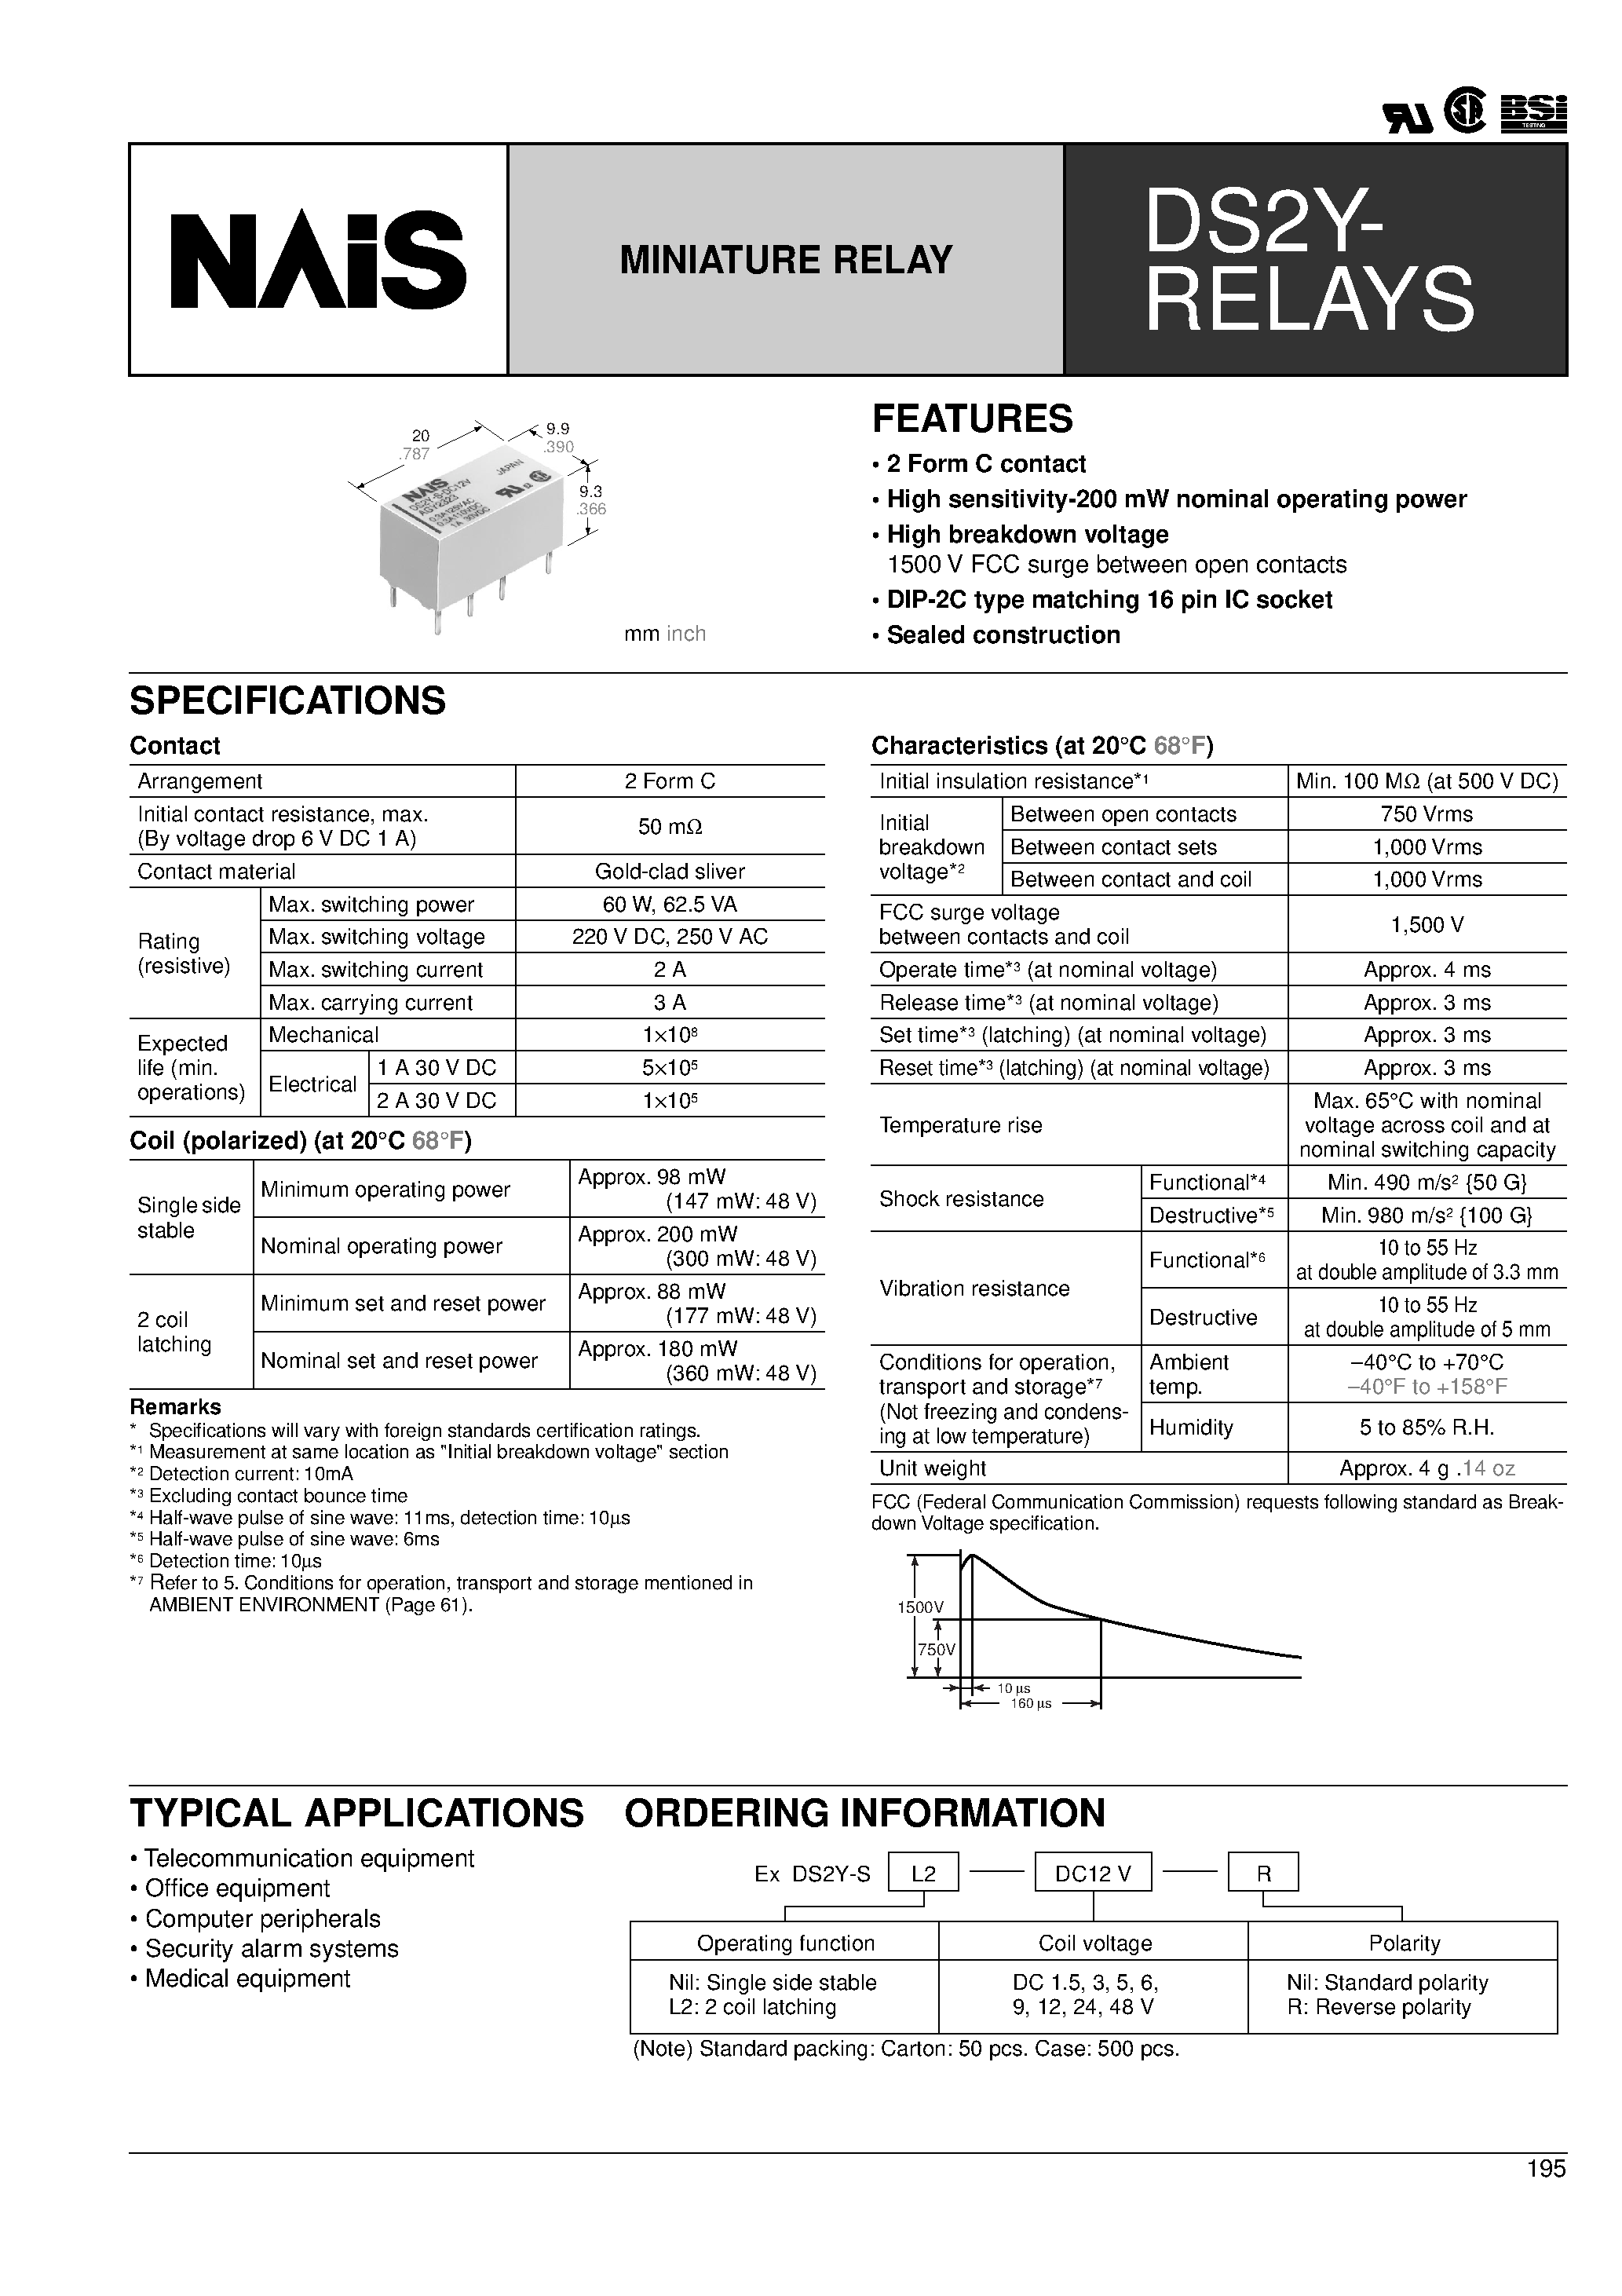 Datasheet DS2Y-SL2-DC6V - 2 Form C contact High sensitivity-200 mW nominal operating power page 1